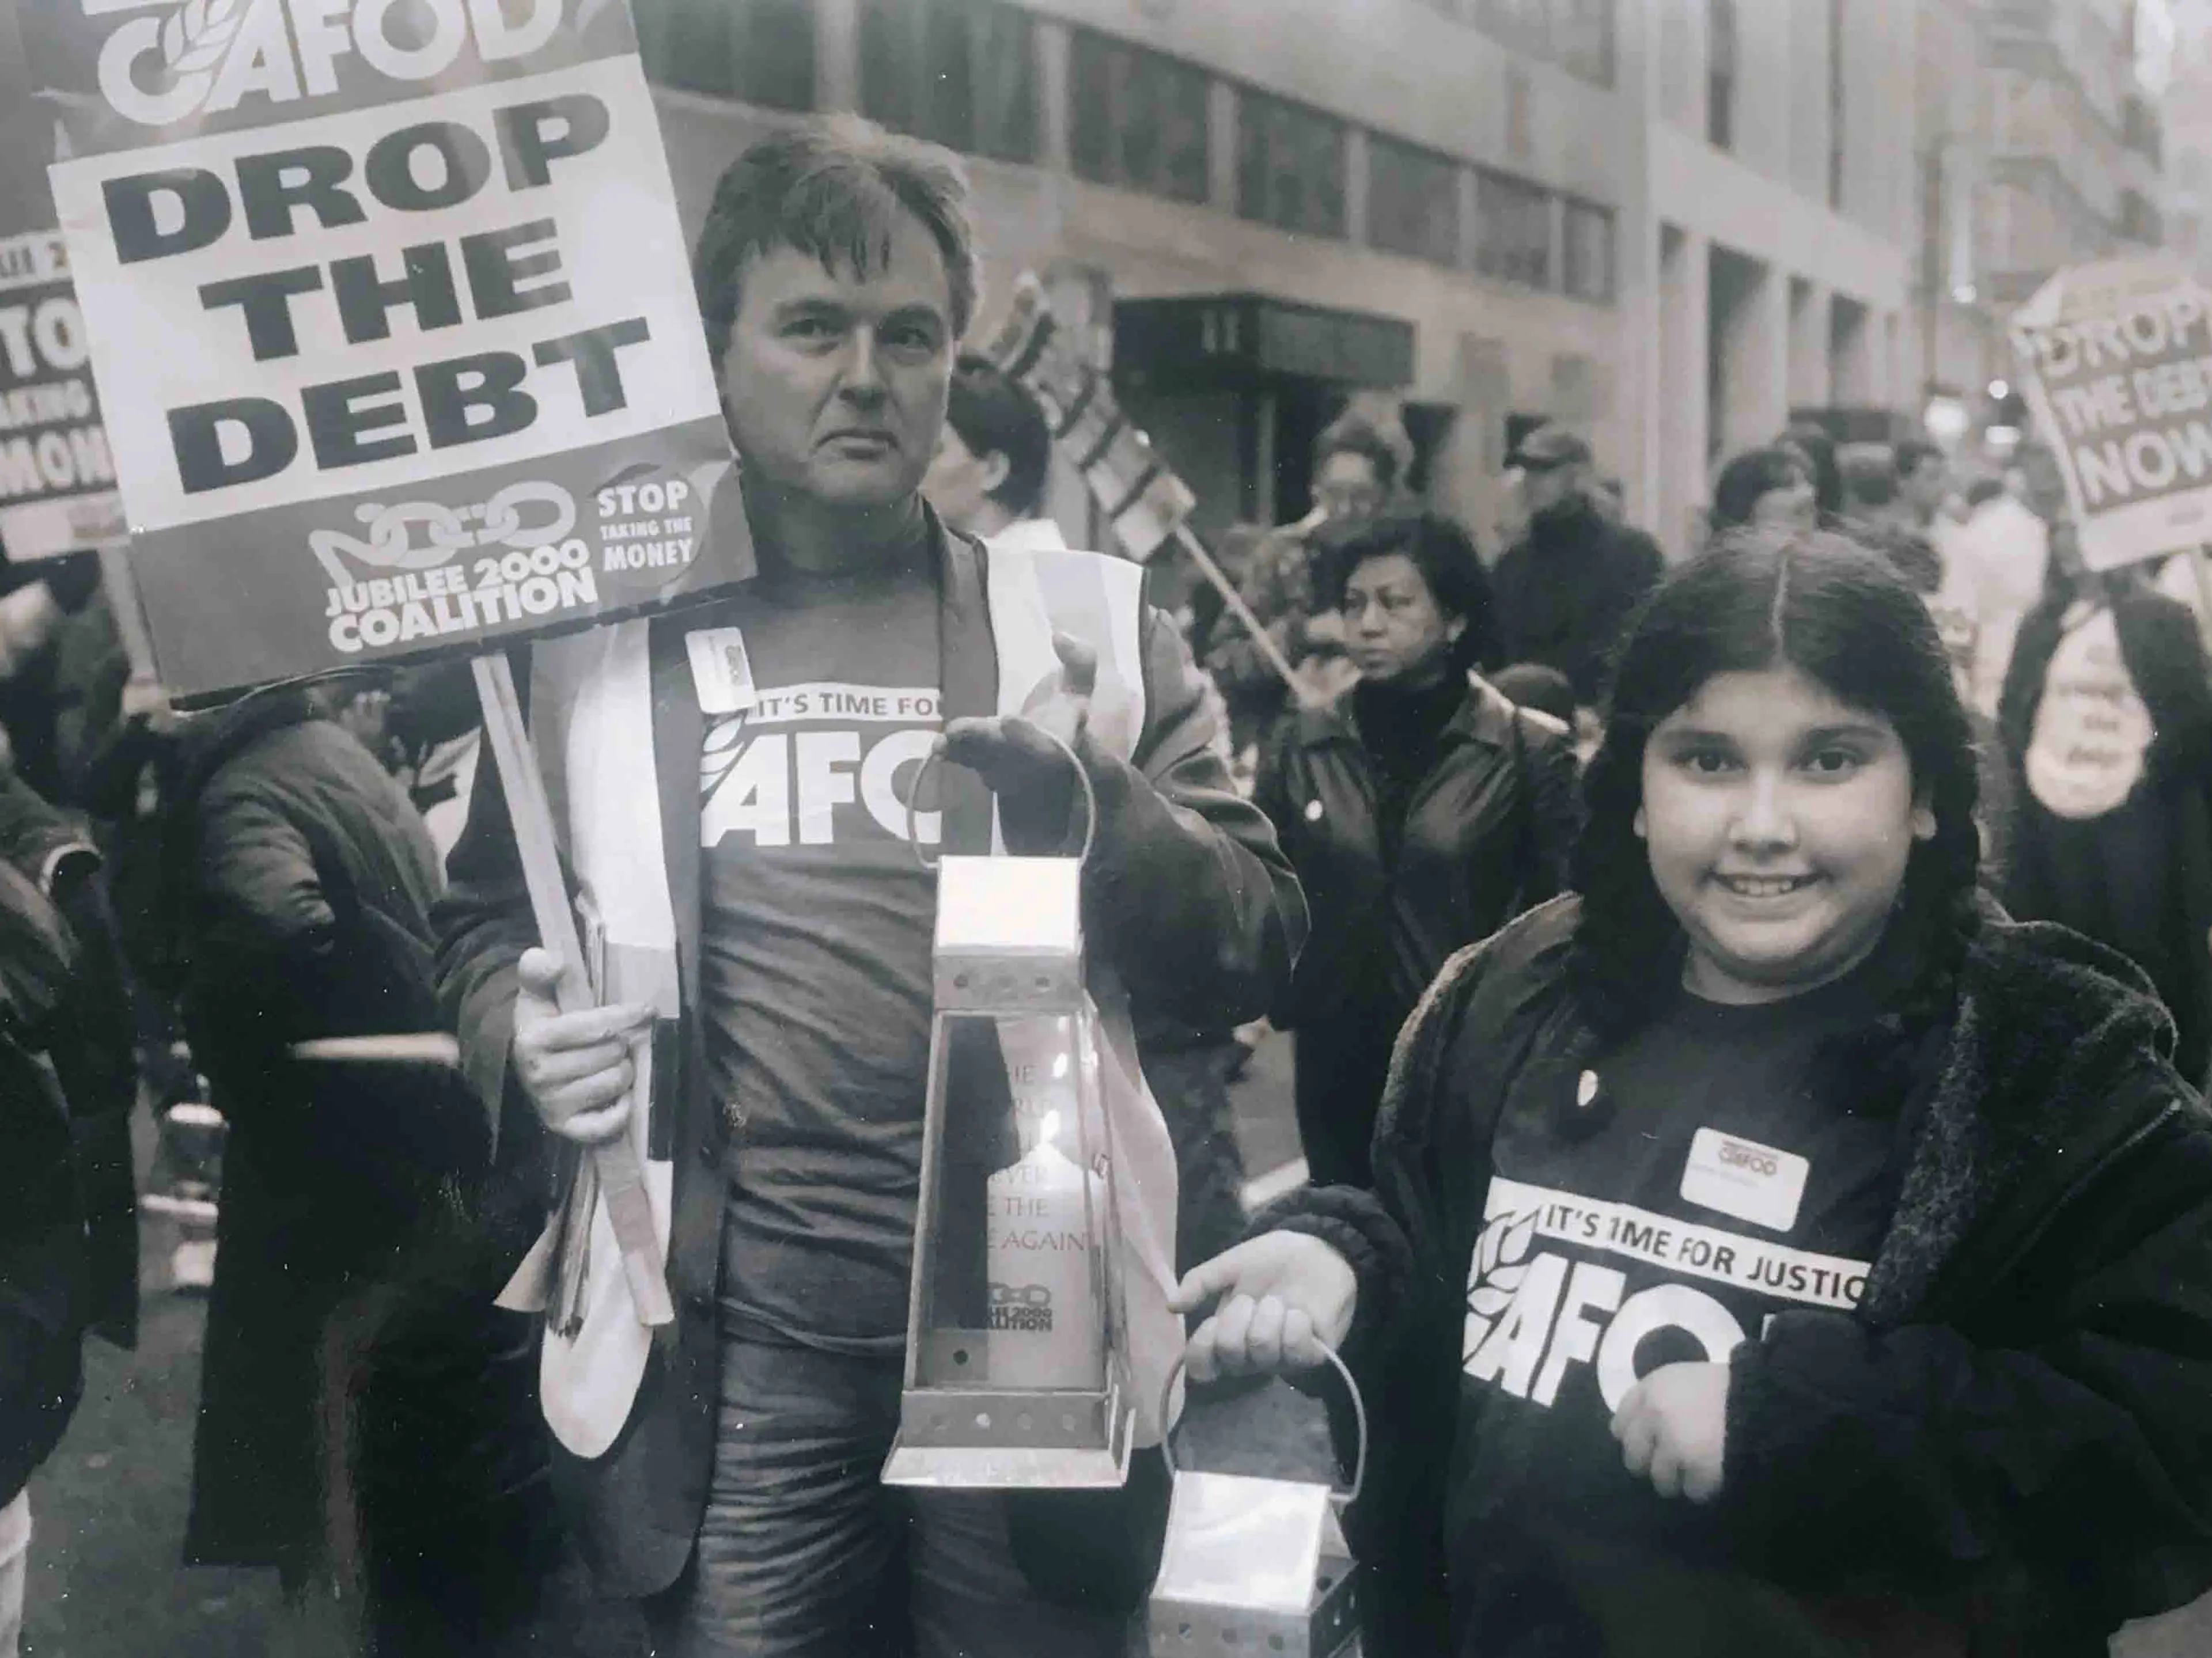 UK - Birmingham - CAFOD supporters at Drop the Debt protests in 1999